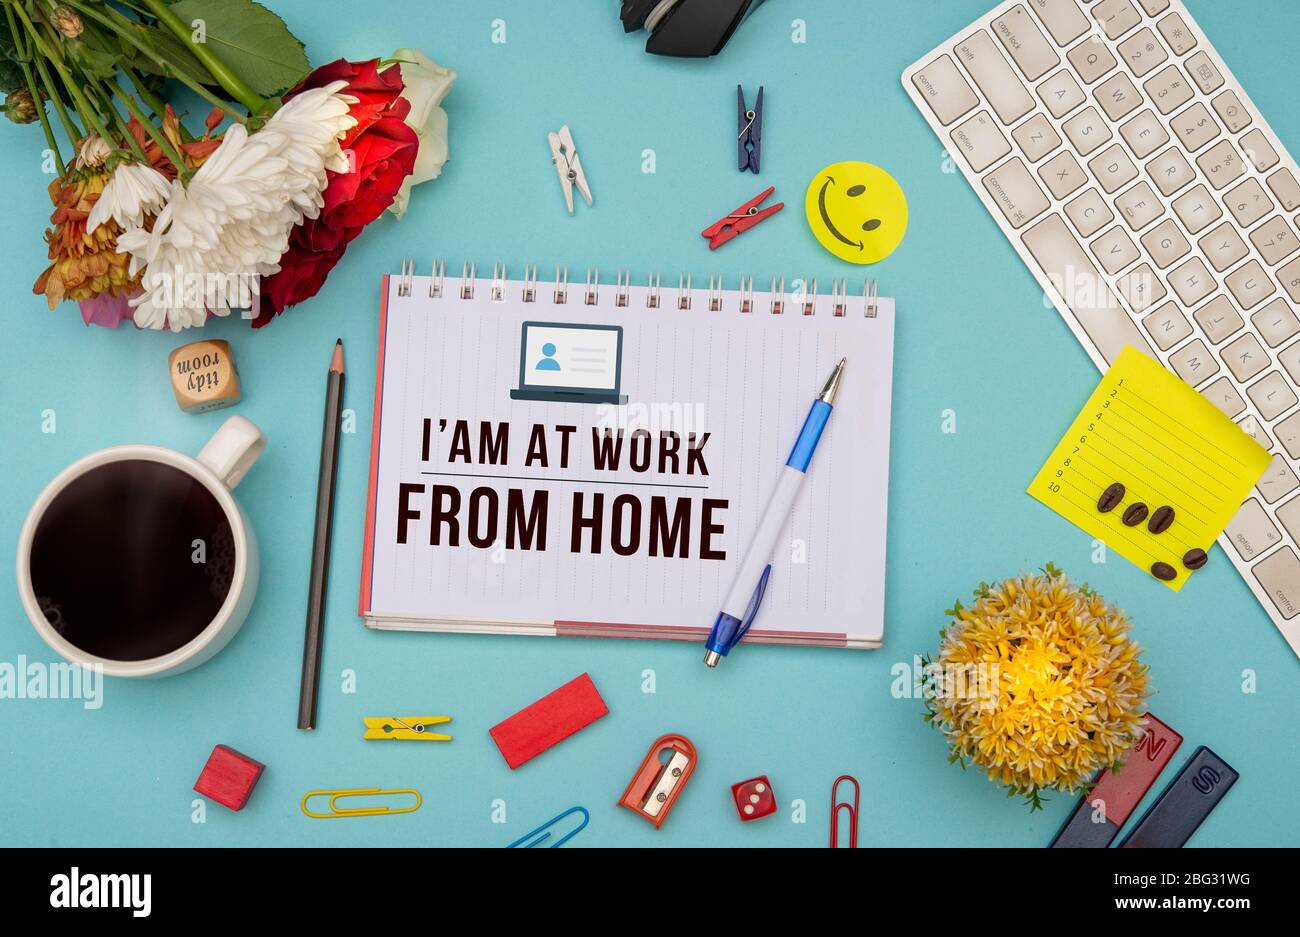 I am working from home banner template Stock Photo